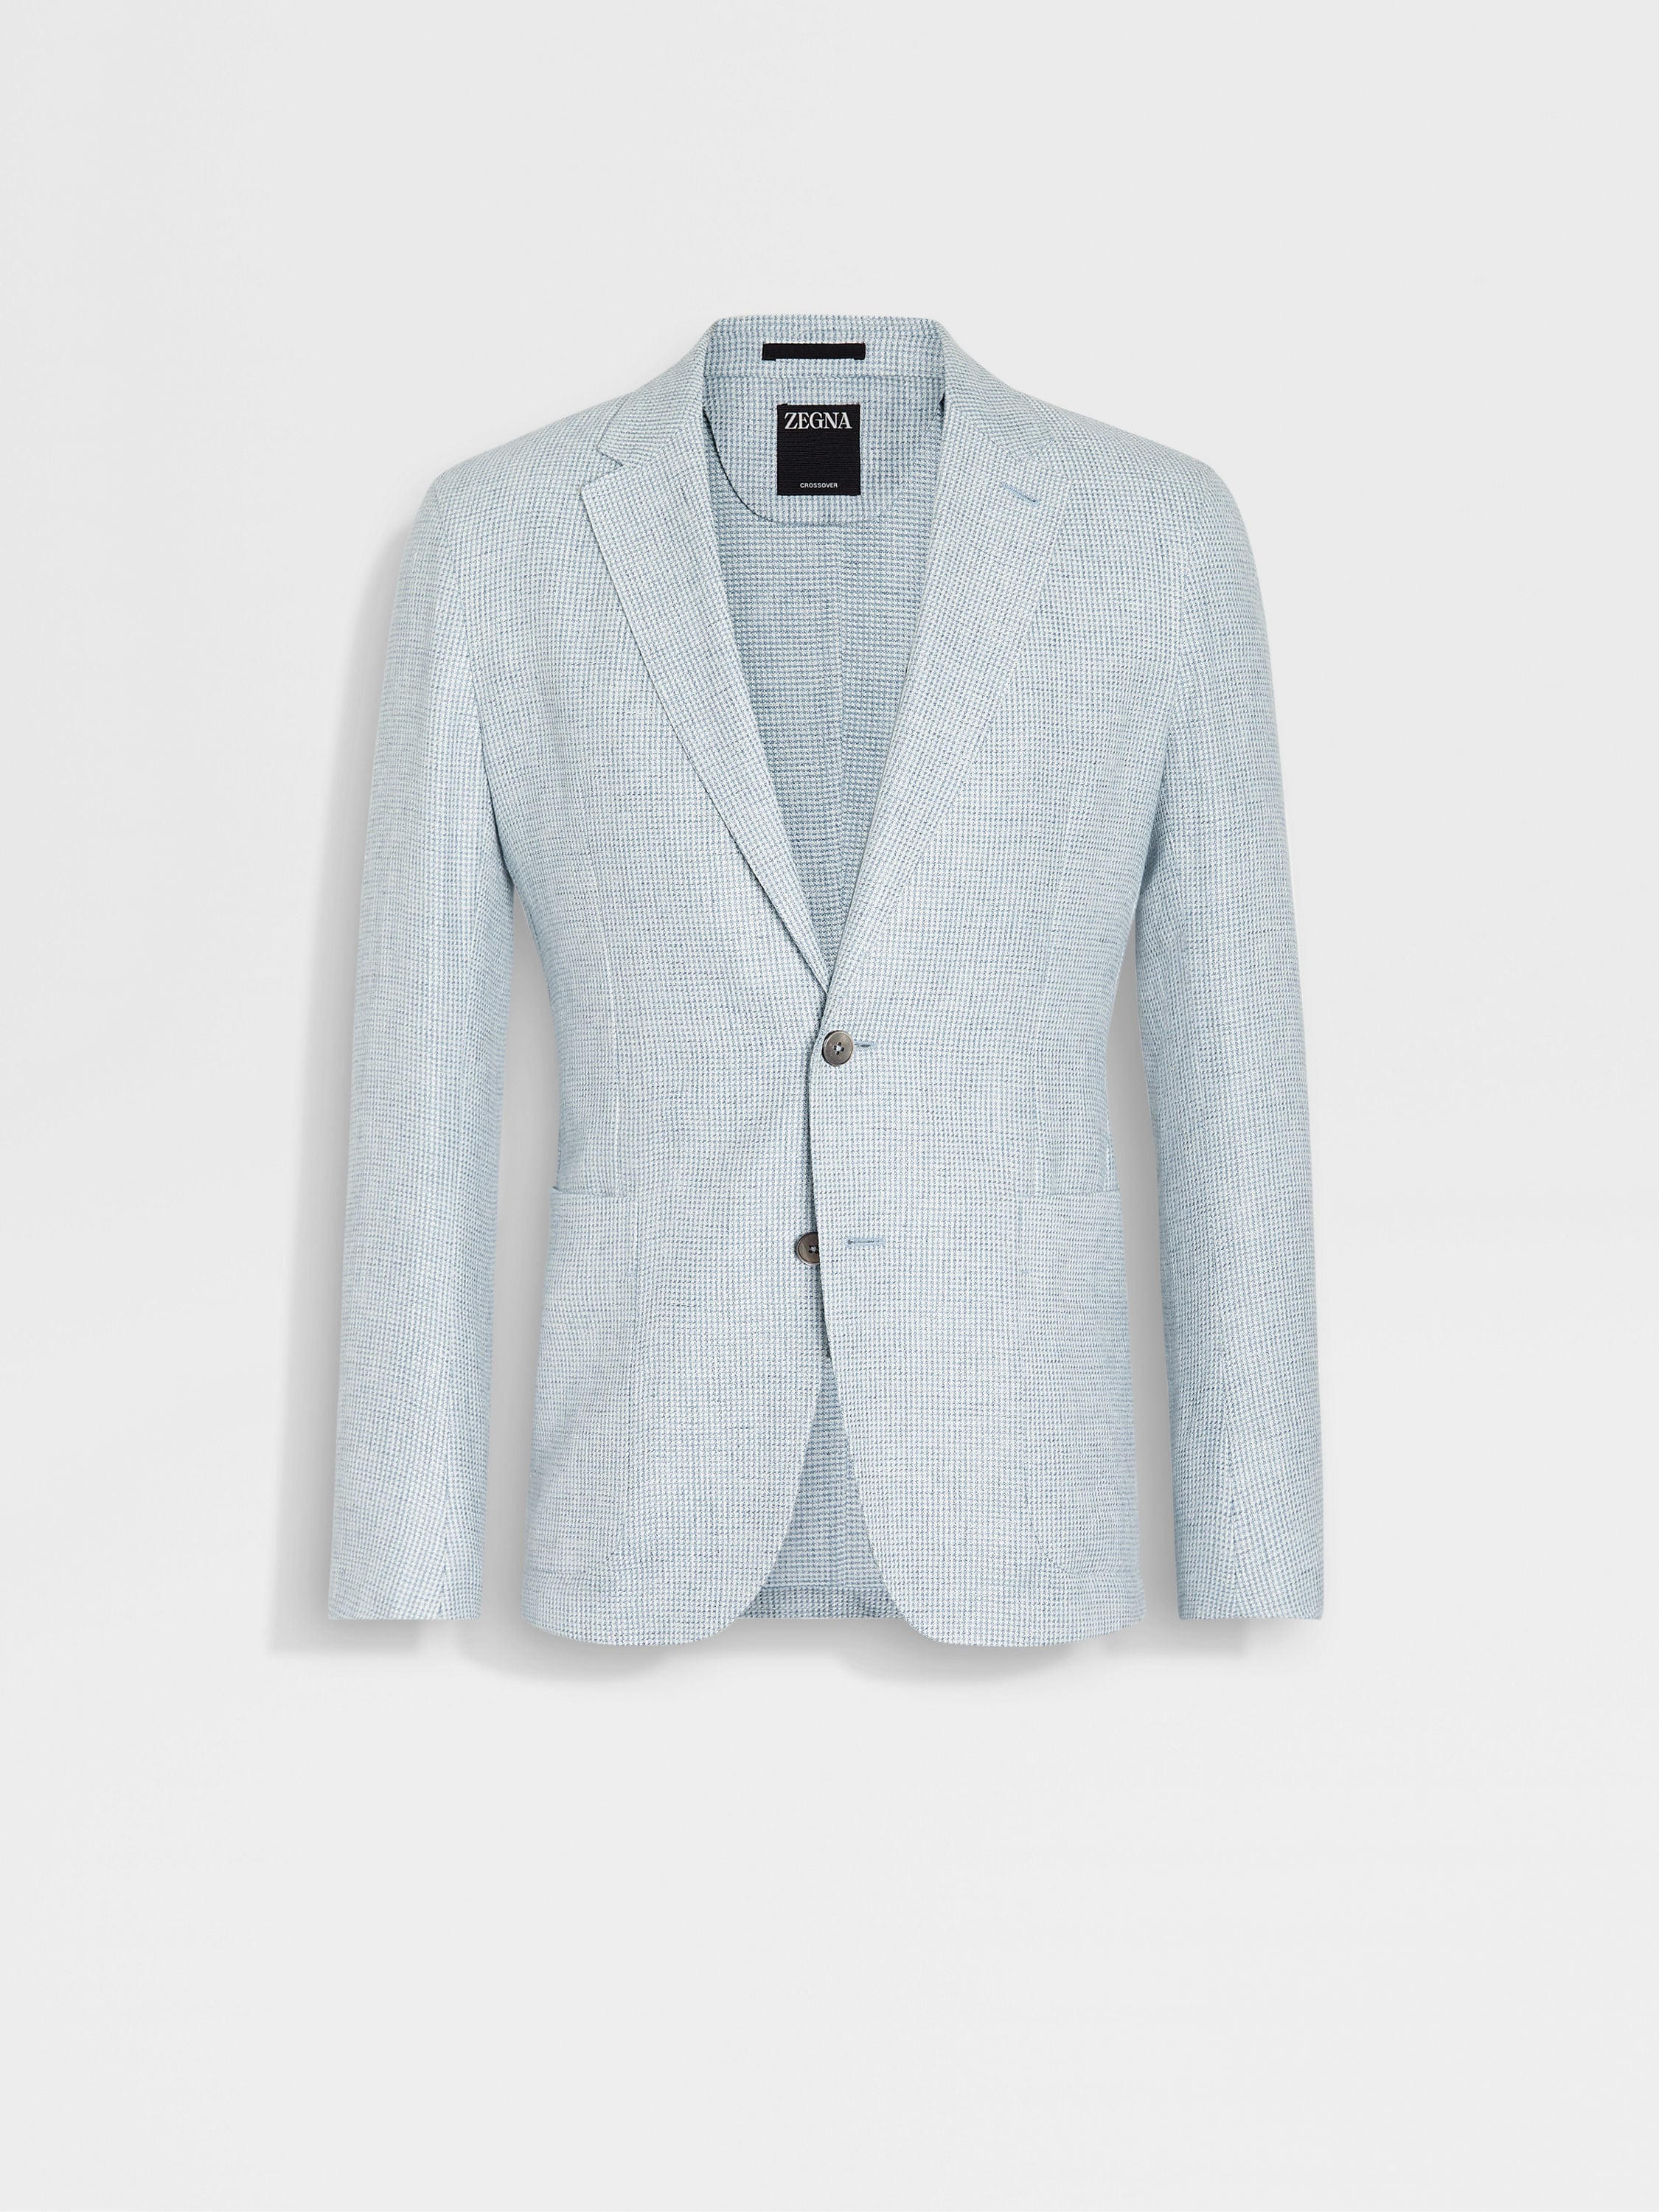 Blue and Navy Blue Crossover Linen Wool and Silk Shirt Jacket